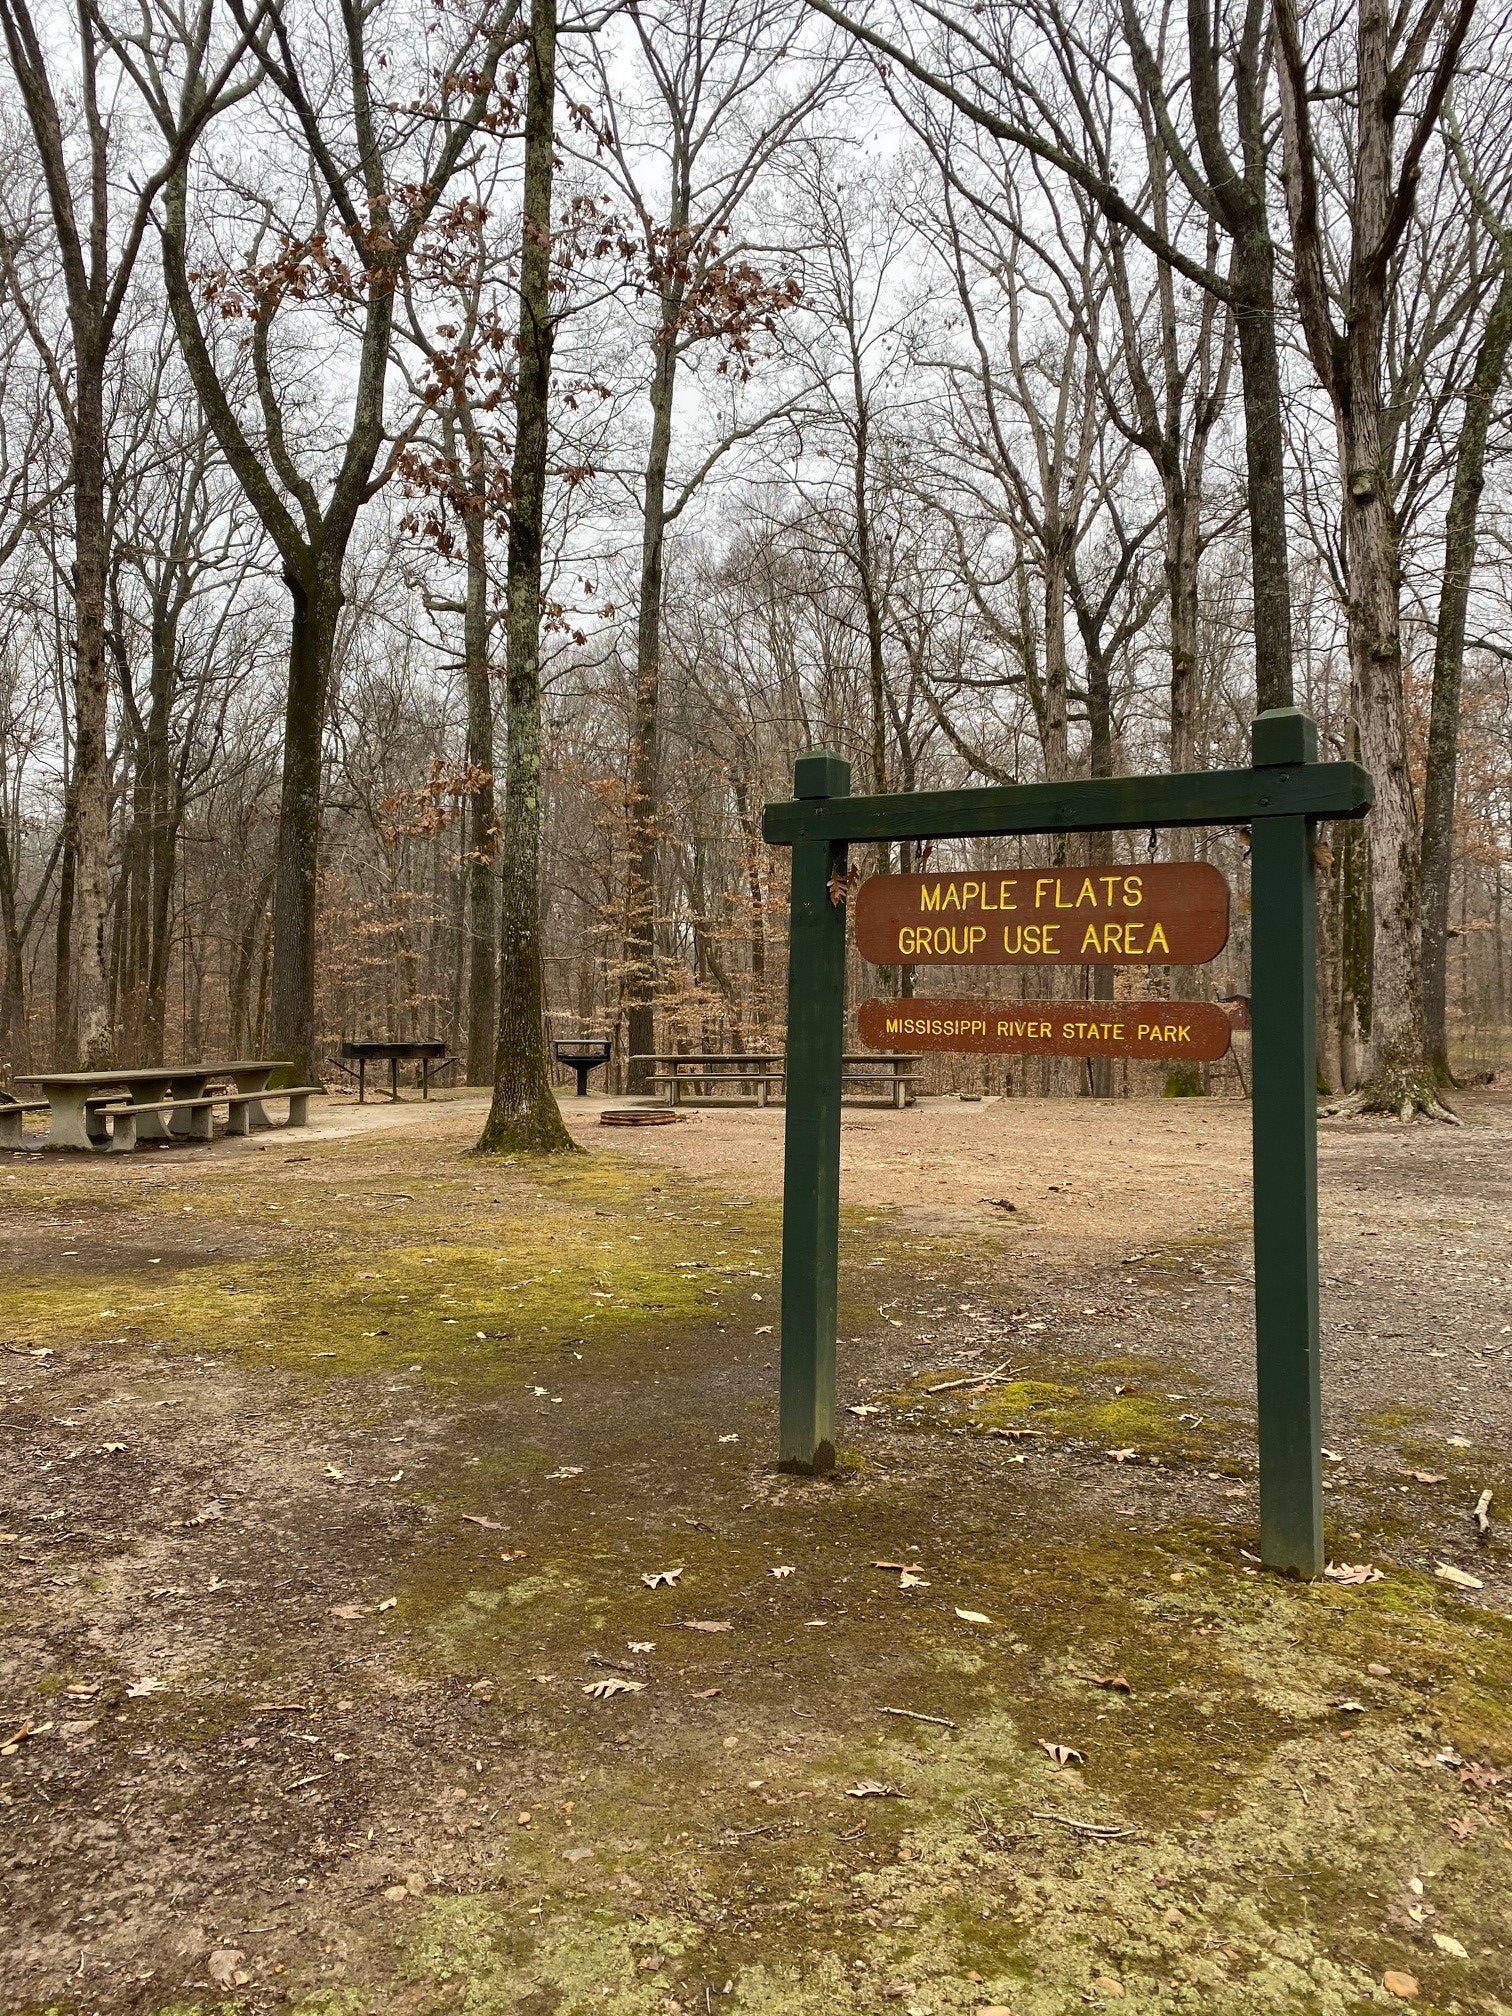 Front of camp with group of picnic tables